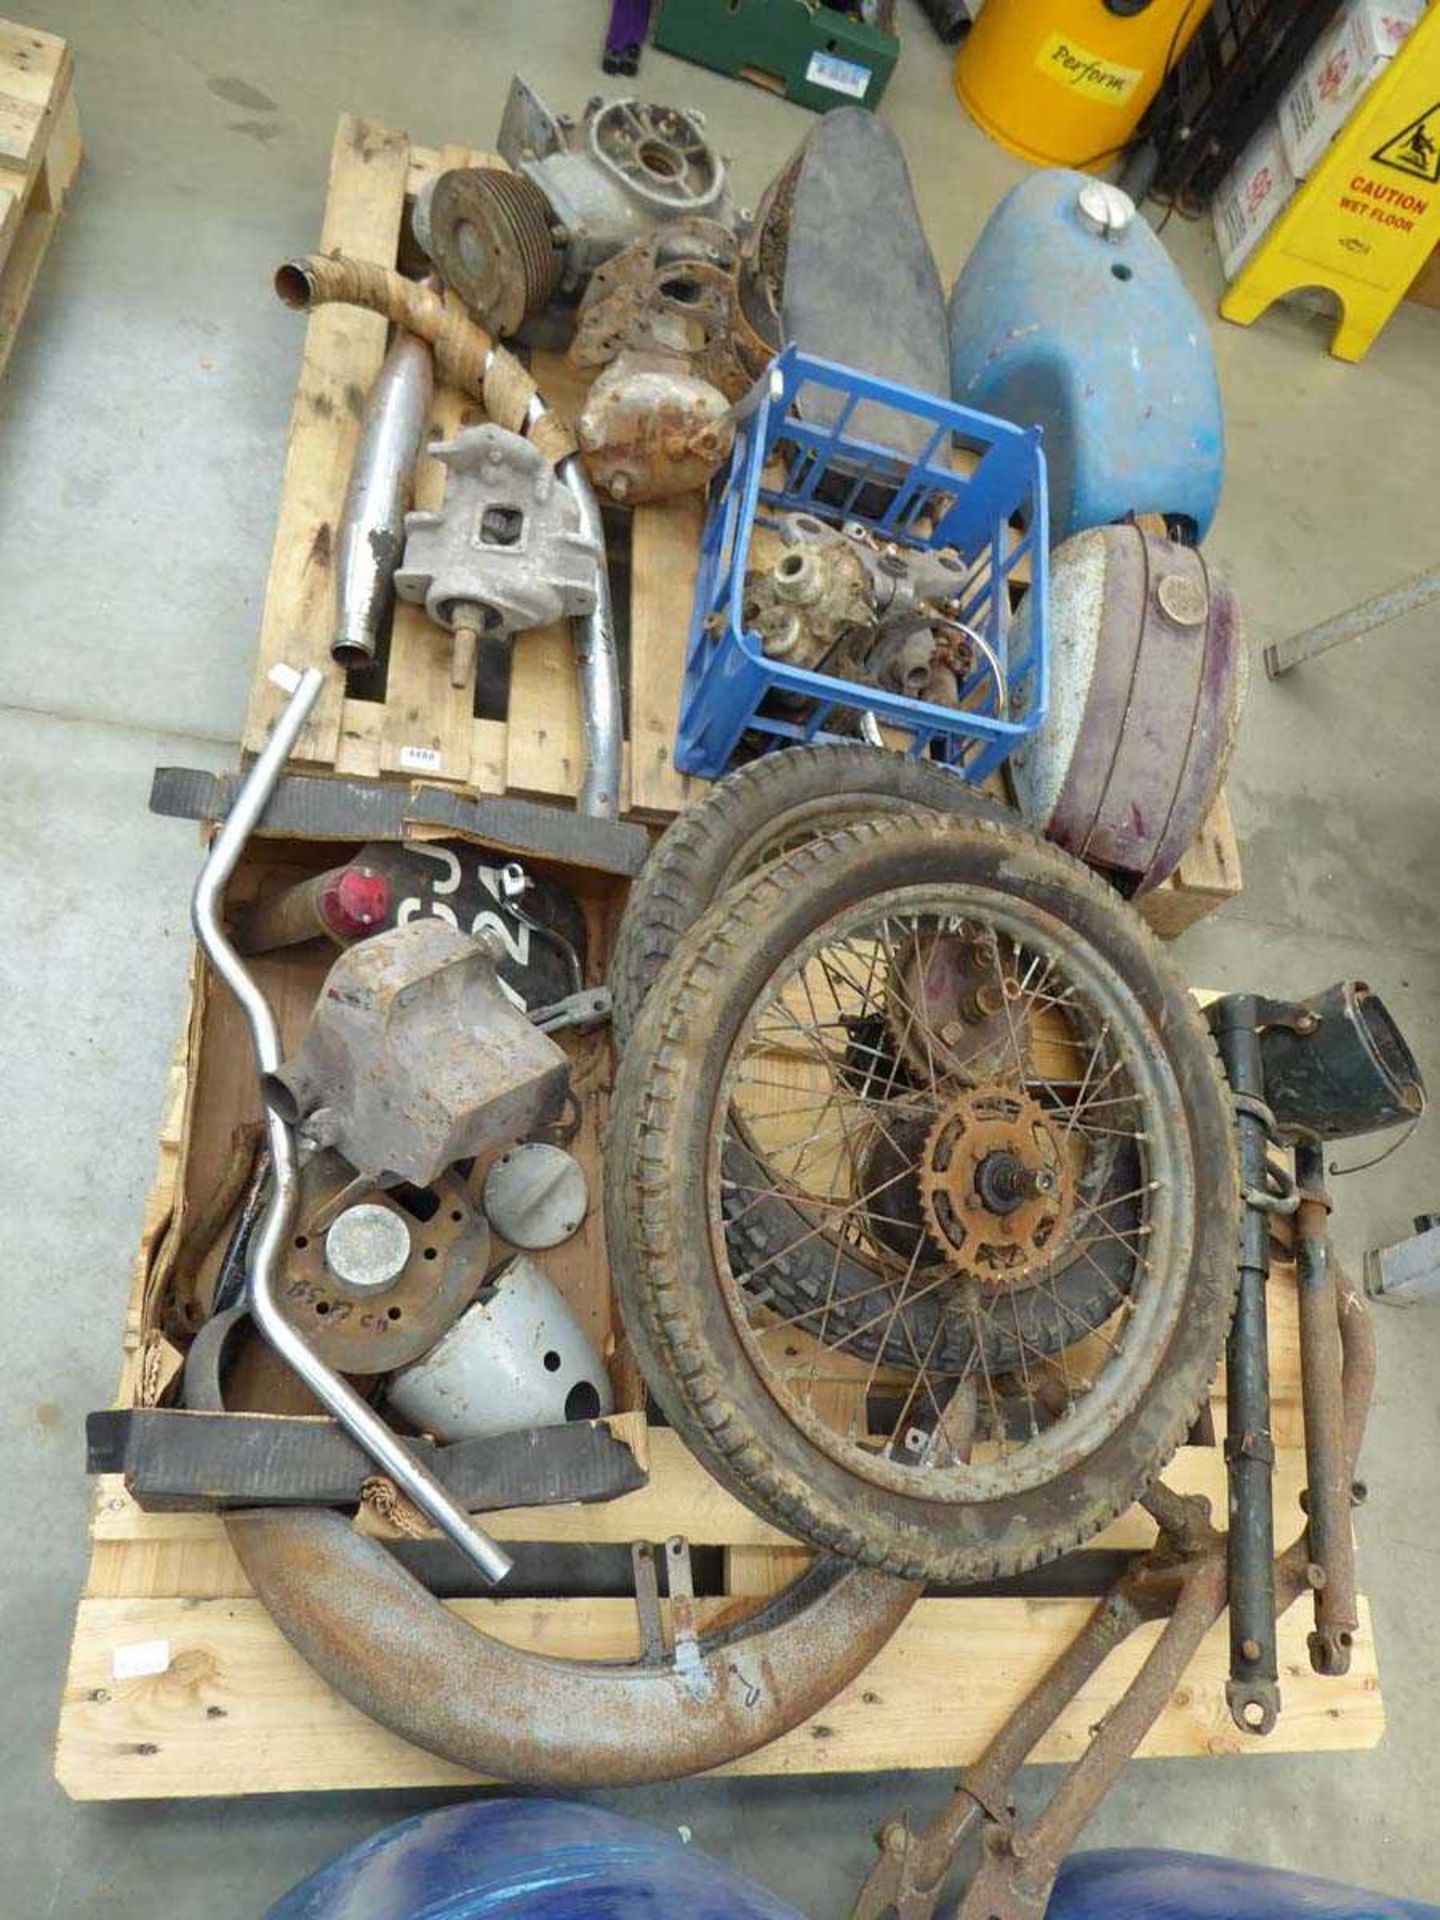 2 pallets of vintage motorcycle spares including wheels, tyres, handlebars, fuel tanks, seats,